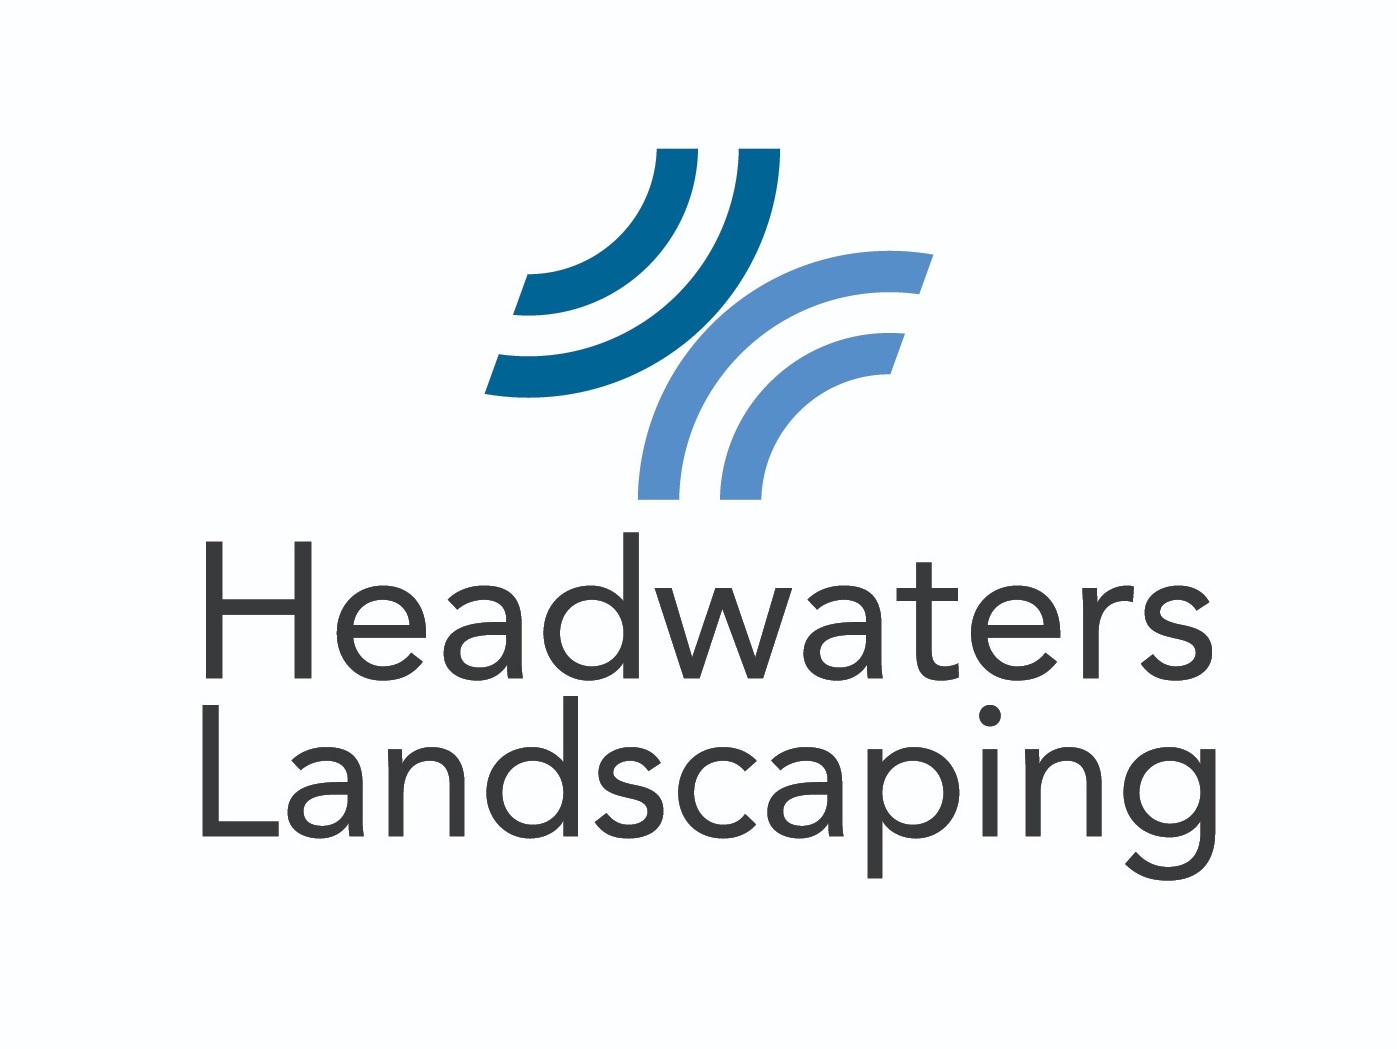 Headwaters Landscaping